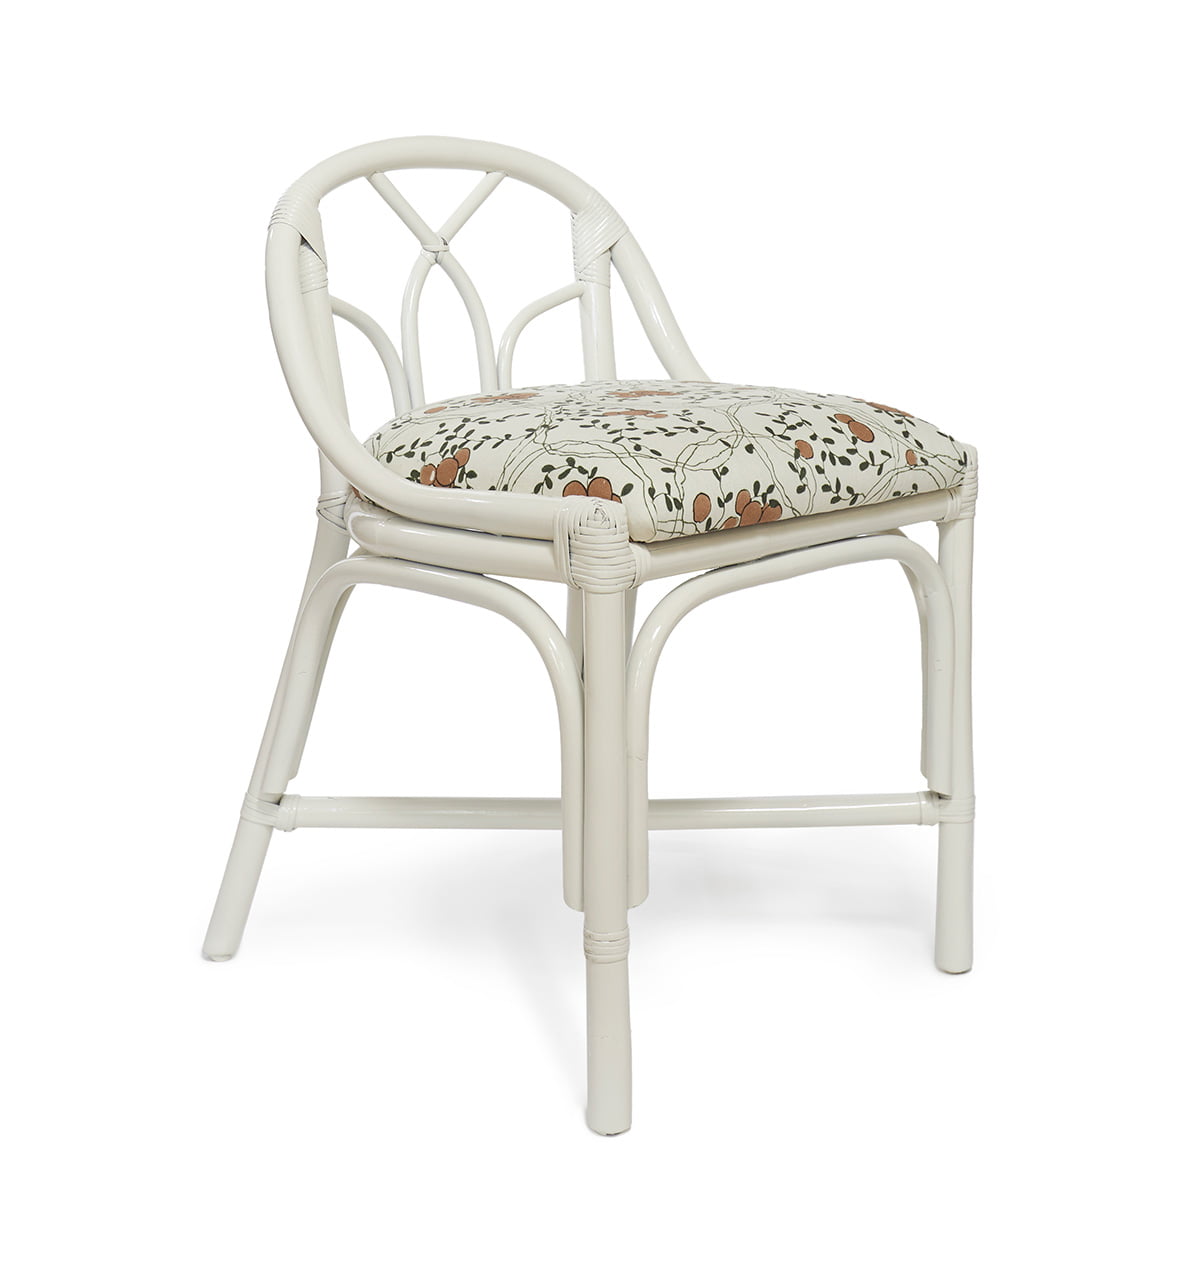 A white rattan chair with a white cushion with a pattern made up of small oranges on a vine.